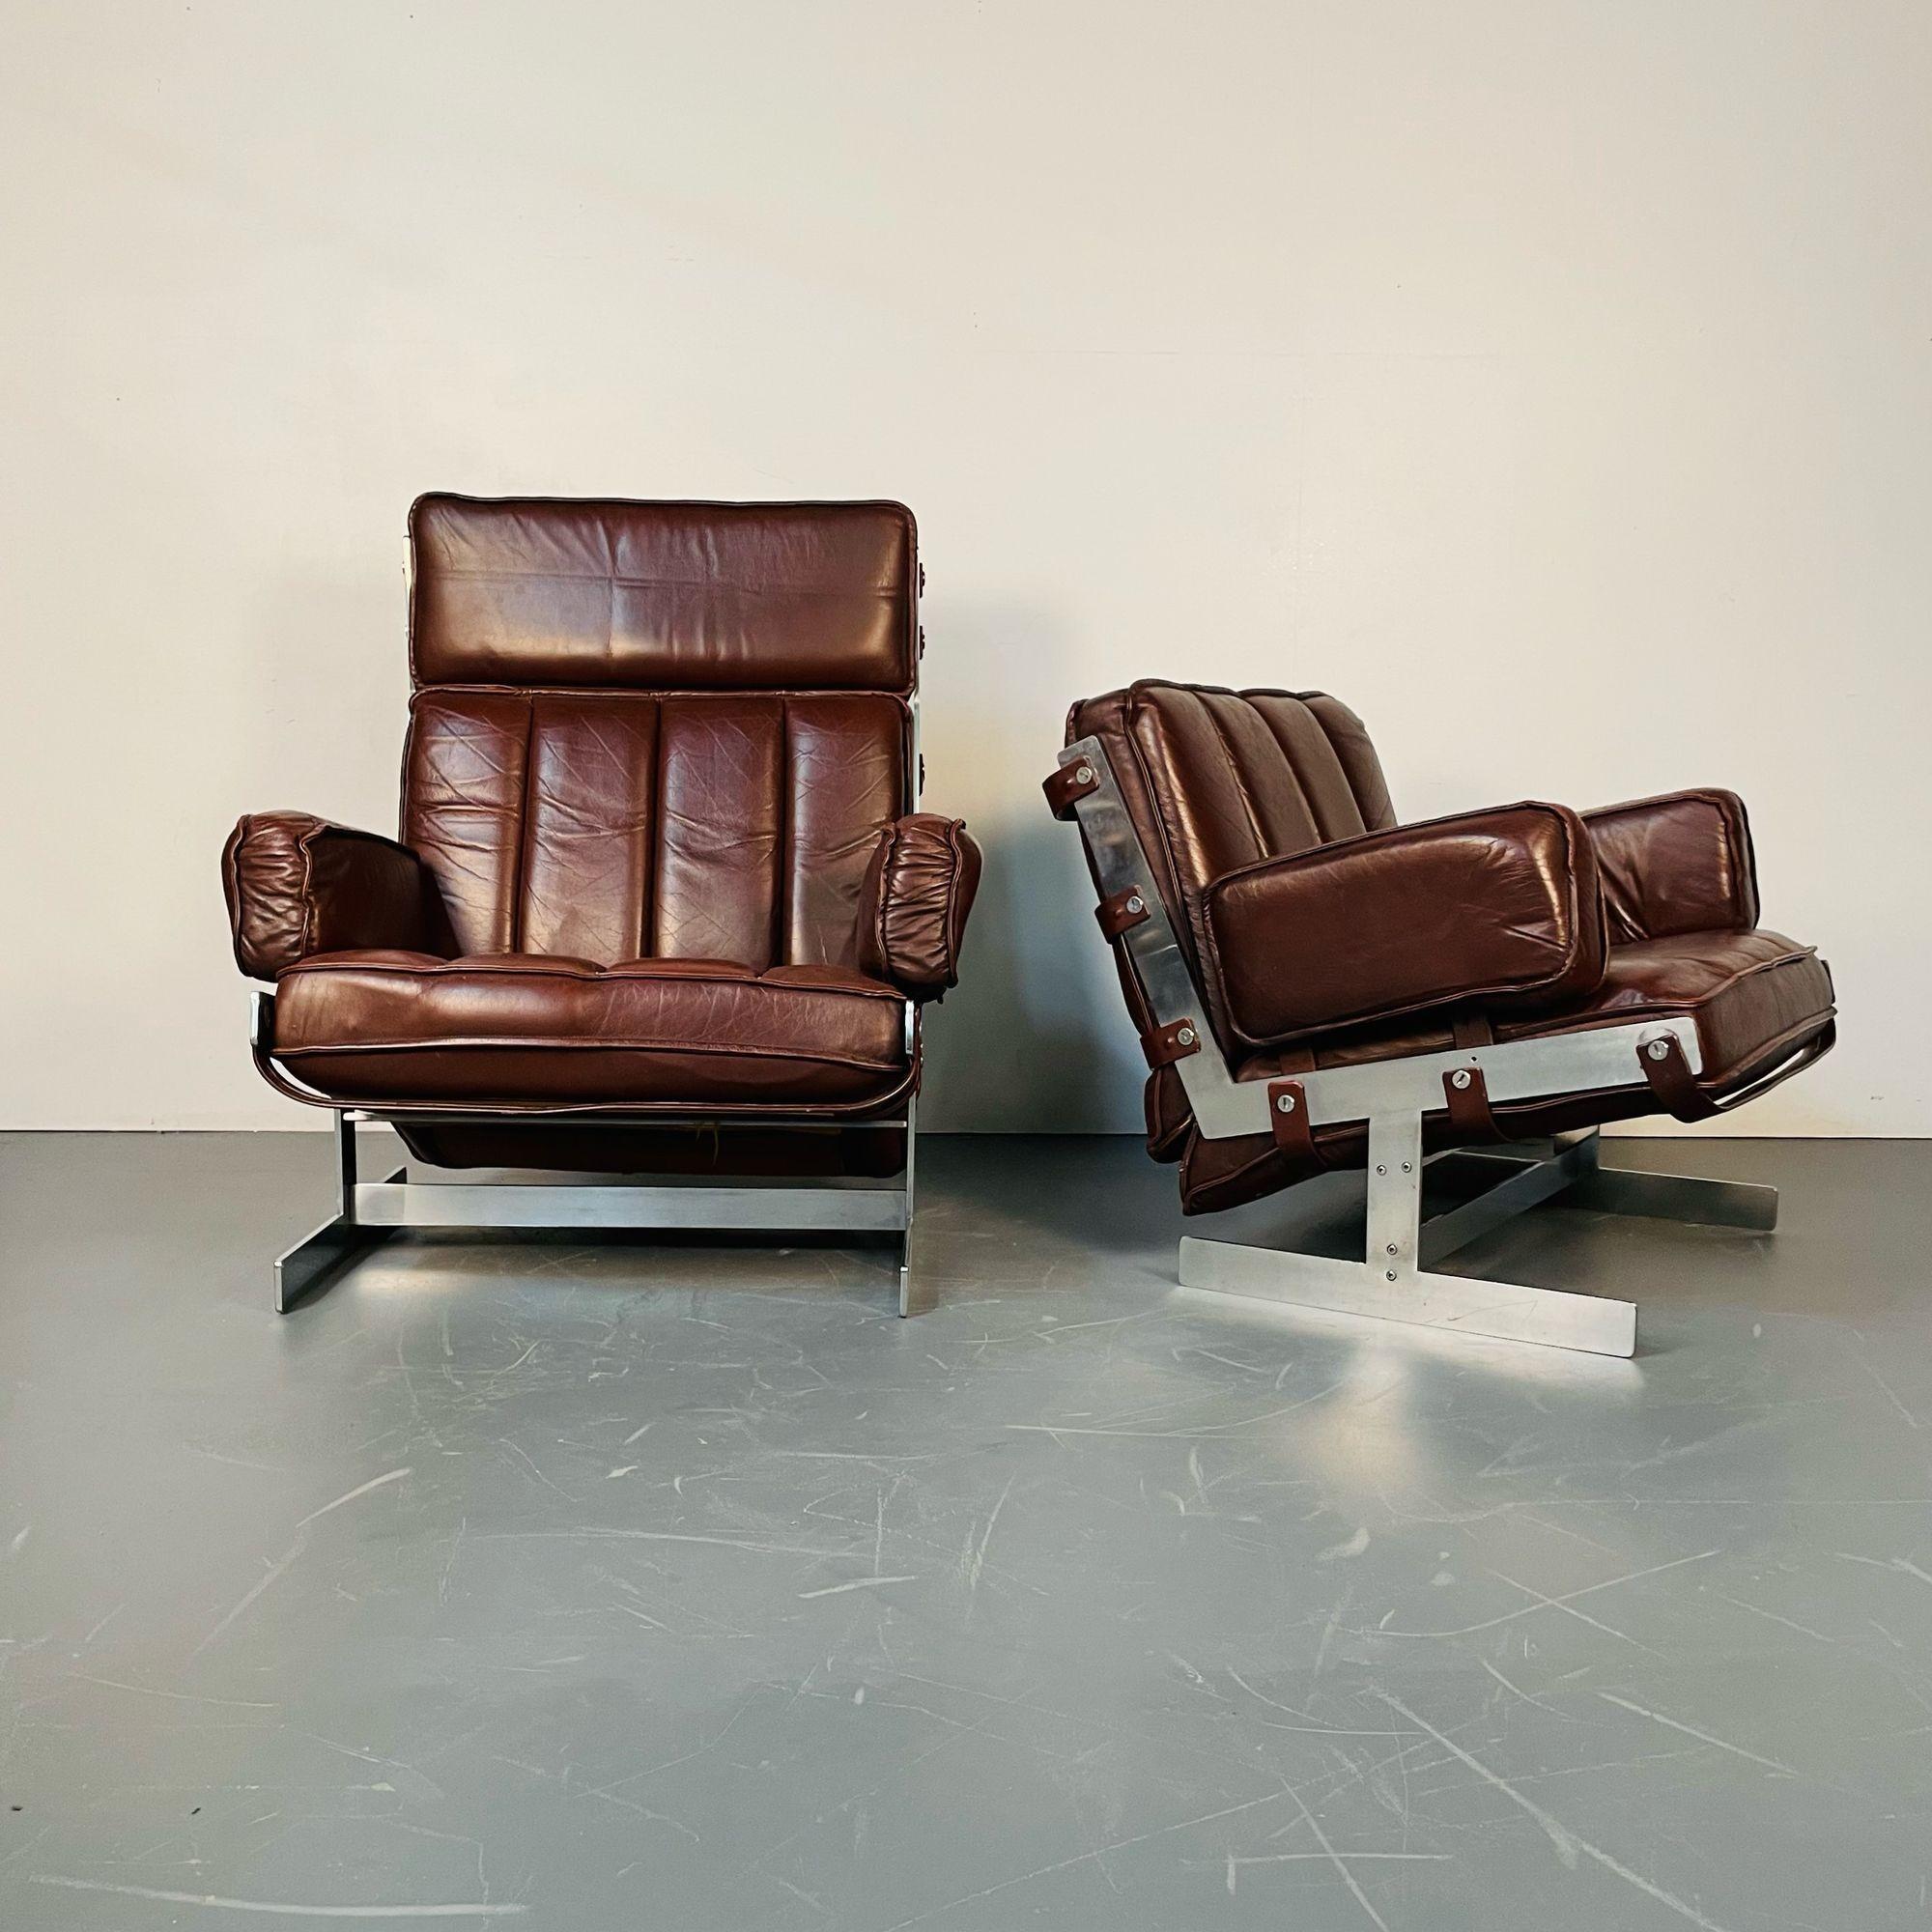 Arne Norell, Swedish Mid-Century Modern Lounge Chairs, Leather, Steel, 1960s In Good Condition For Sale In Stamford, CT